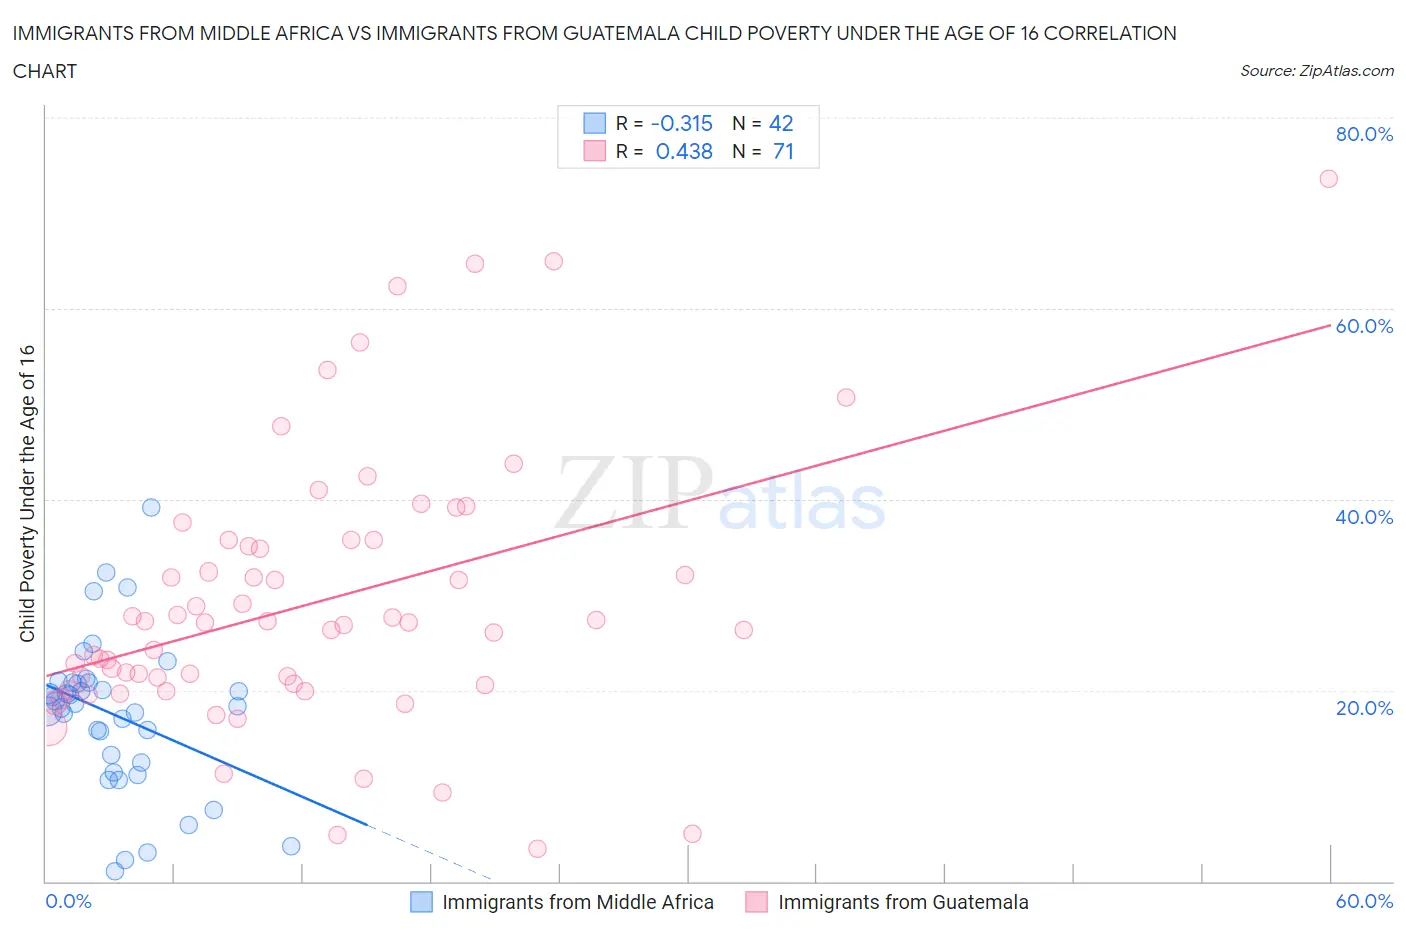 Immigrants from Middle Africa vs Immigrants from Guatemala Child Poverty Under the Age of 16